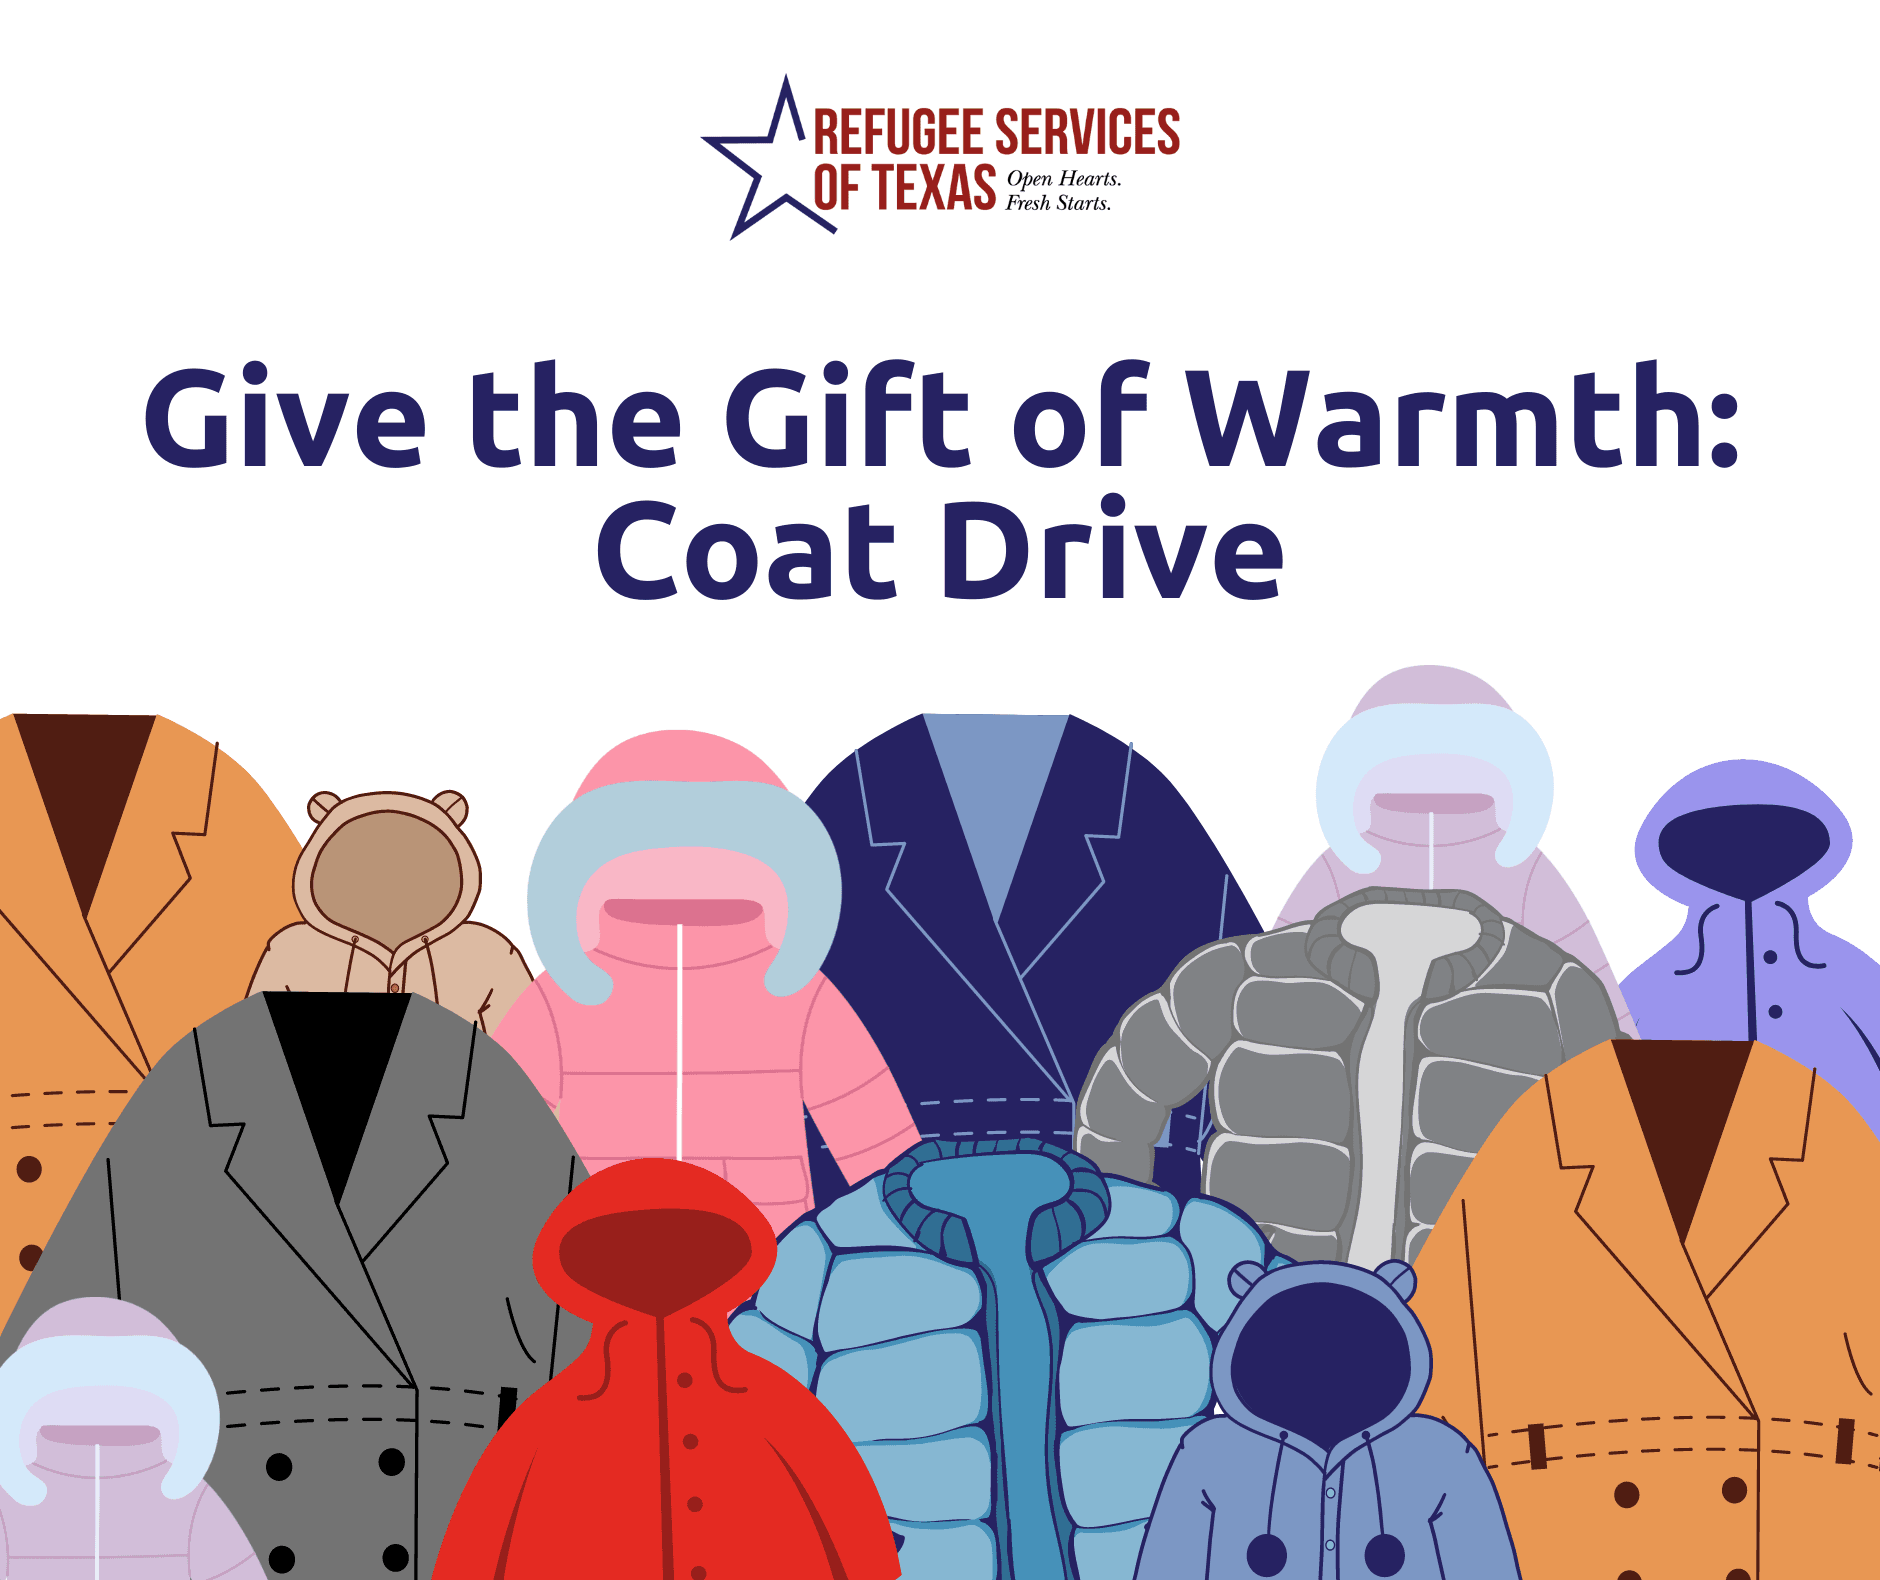 Graphic that says "Give the Gift of Warmth Coat Drive" and has rows of cartoon coats.